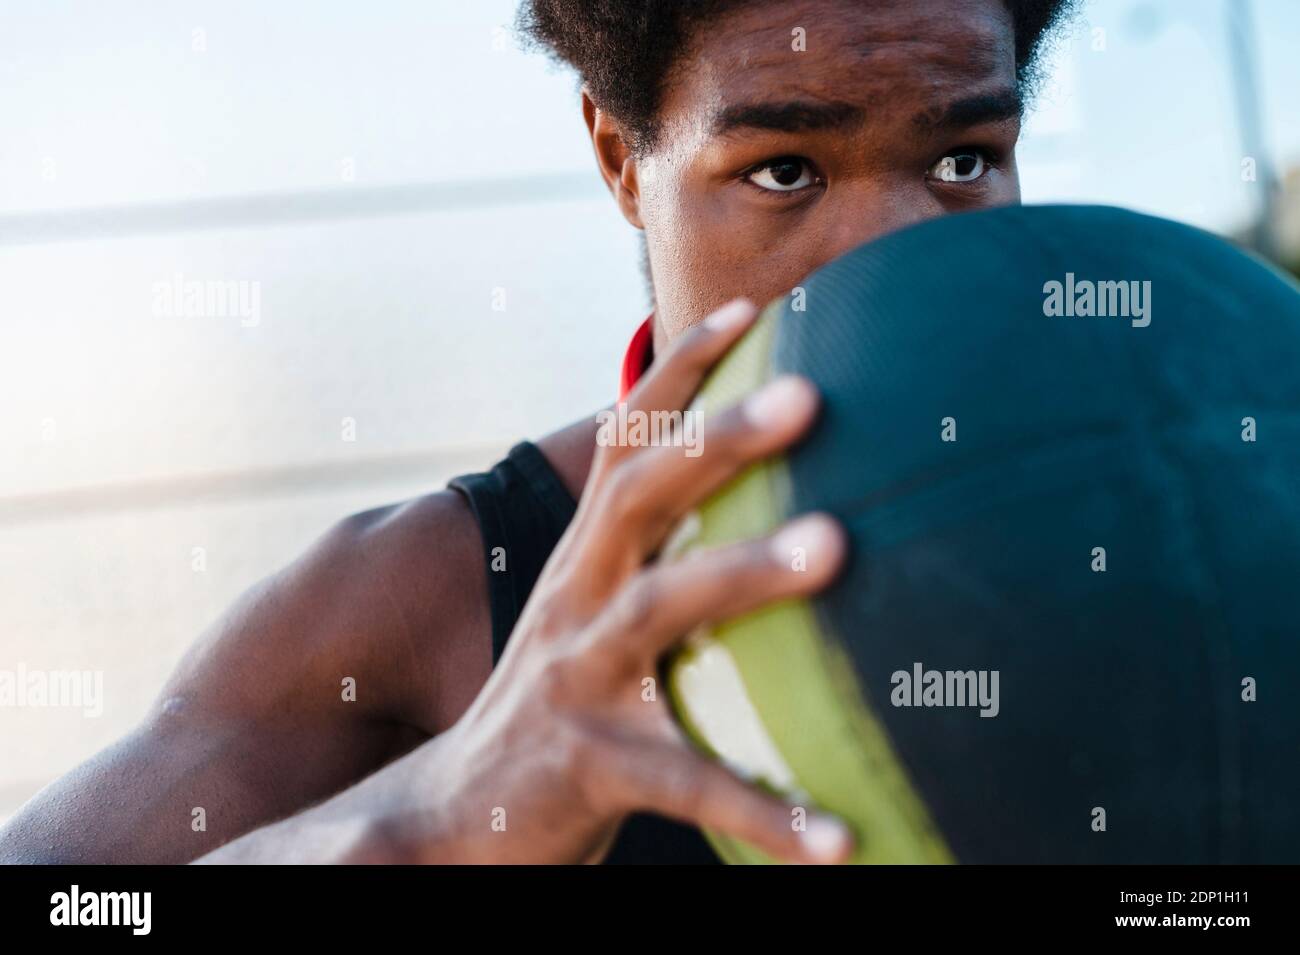 Close-up of a young man holding basketball Stock Photo